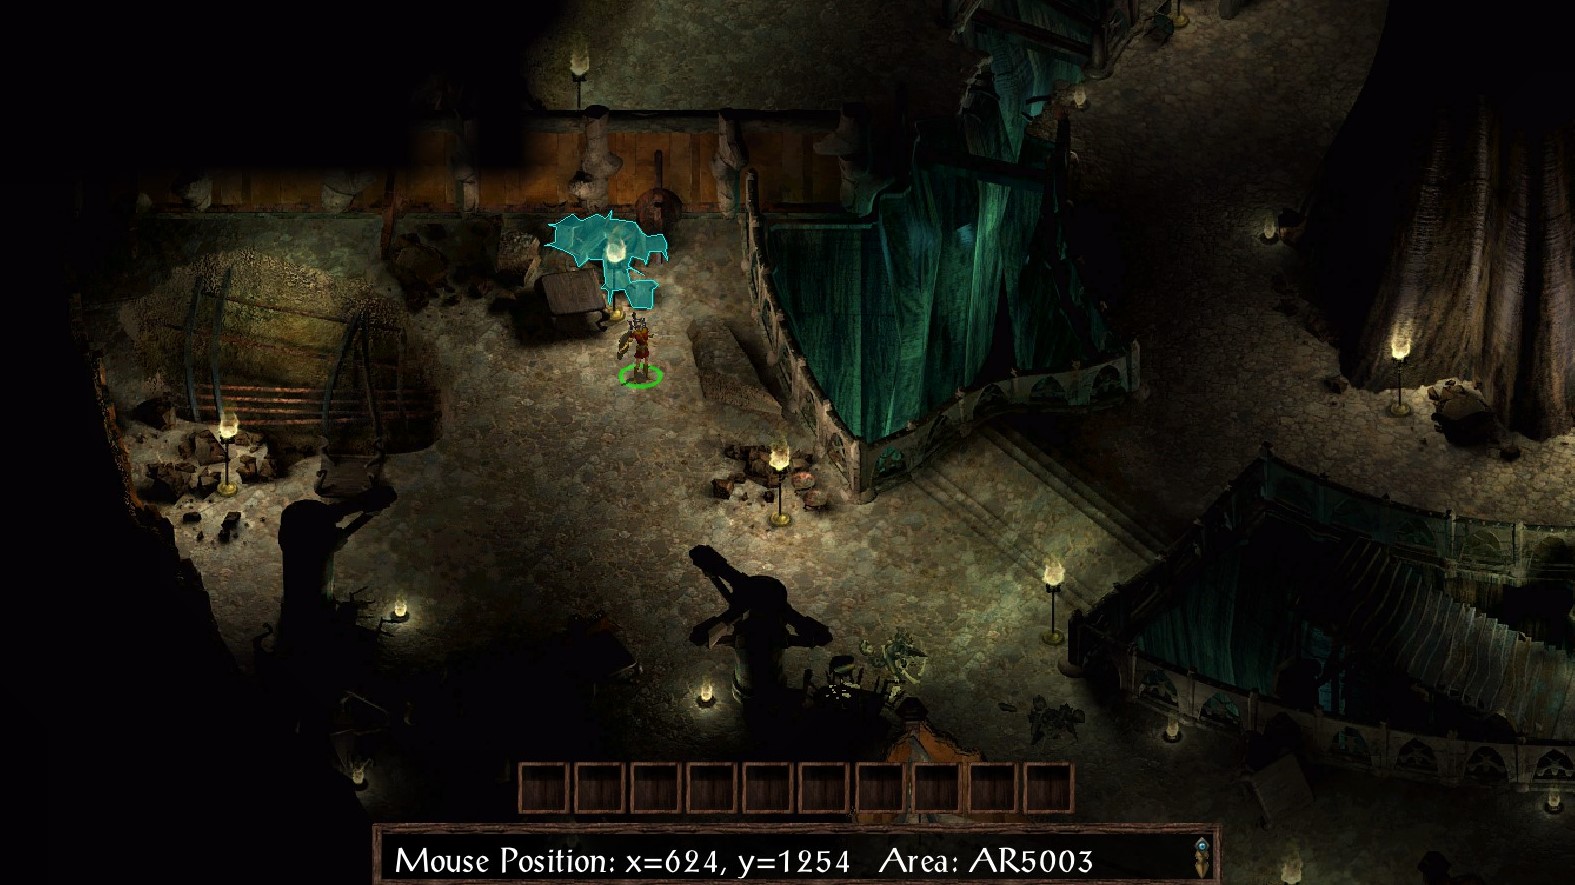 Icewind Dale: Enhanced Edition - Guide includes a list of random treasures - Severed Hand – level 3 - 887A790